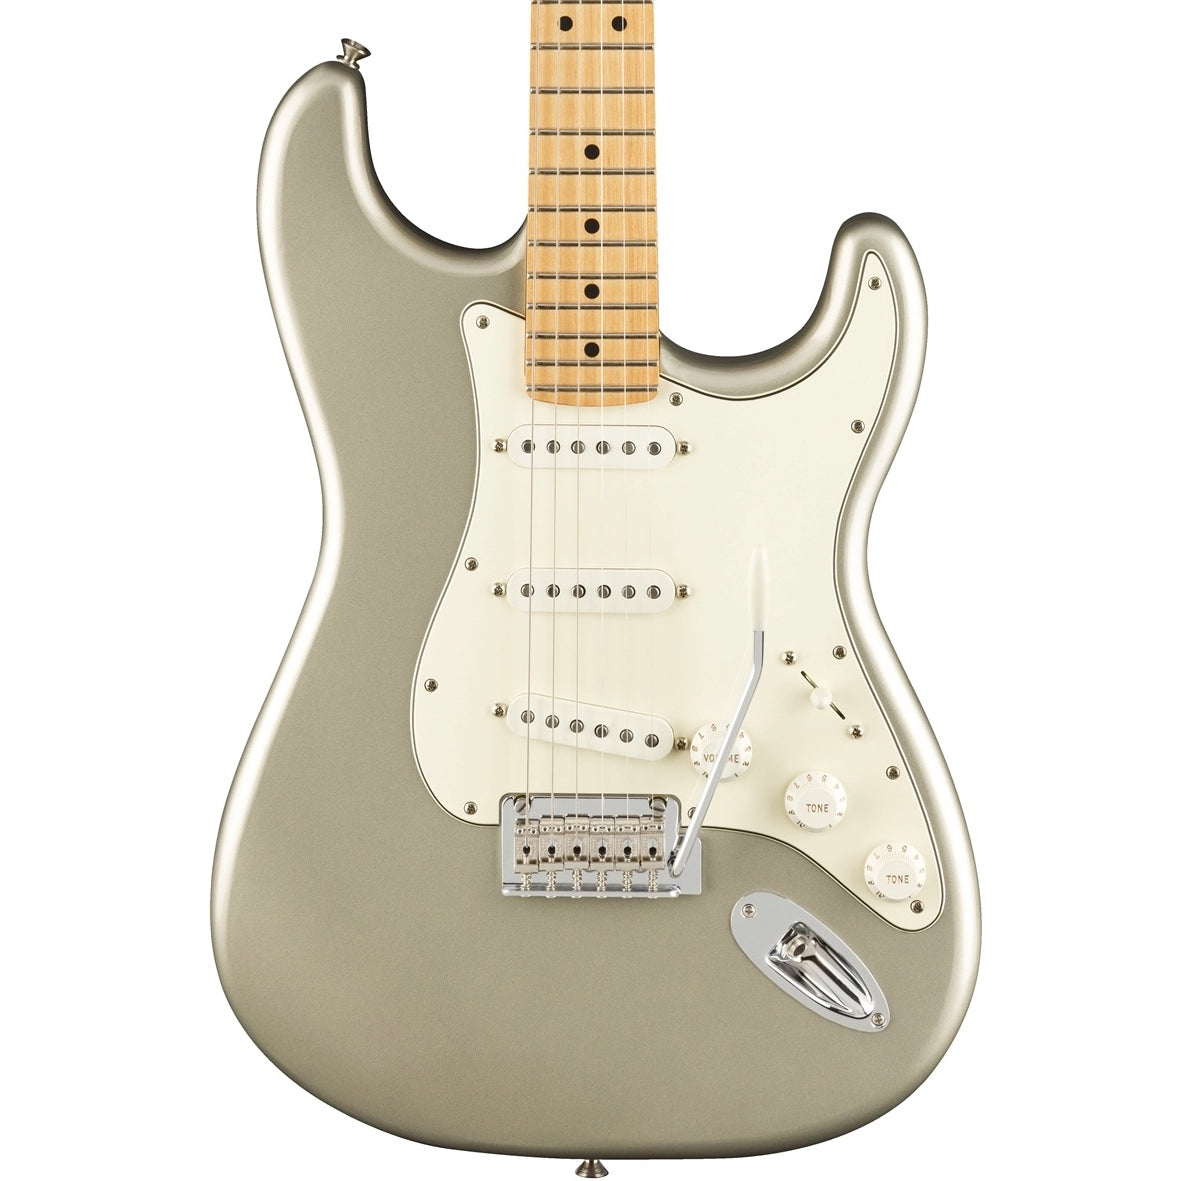 Fender Limited Edition Player Stratocaster Inca Silver | Music Experience | Shop Online | South Africa